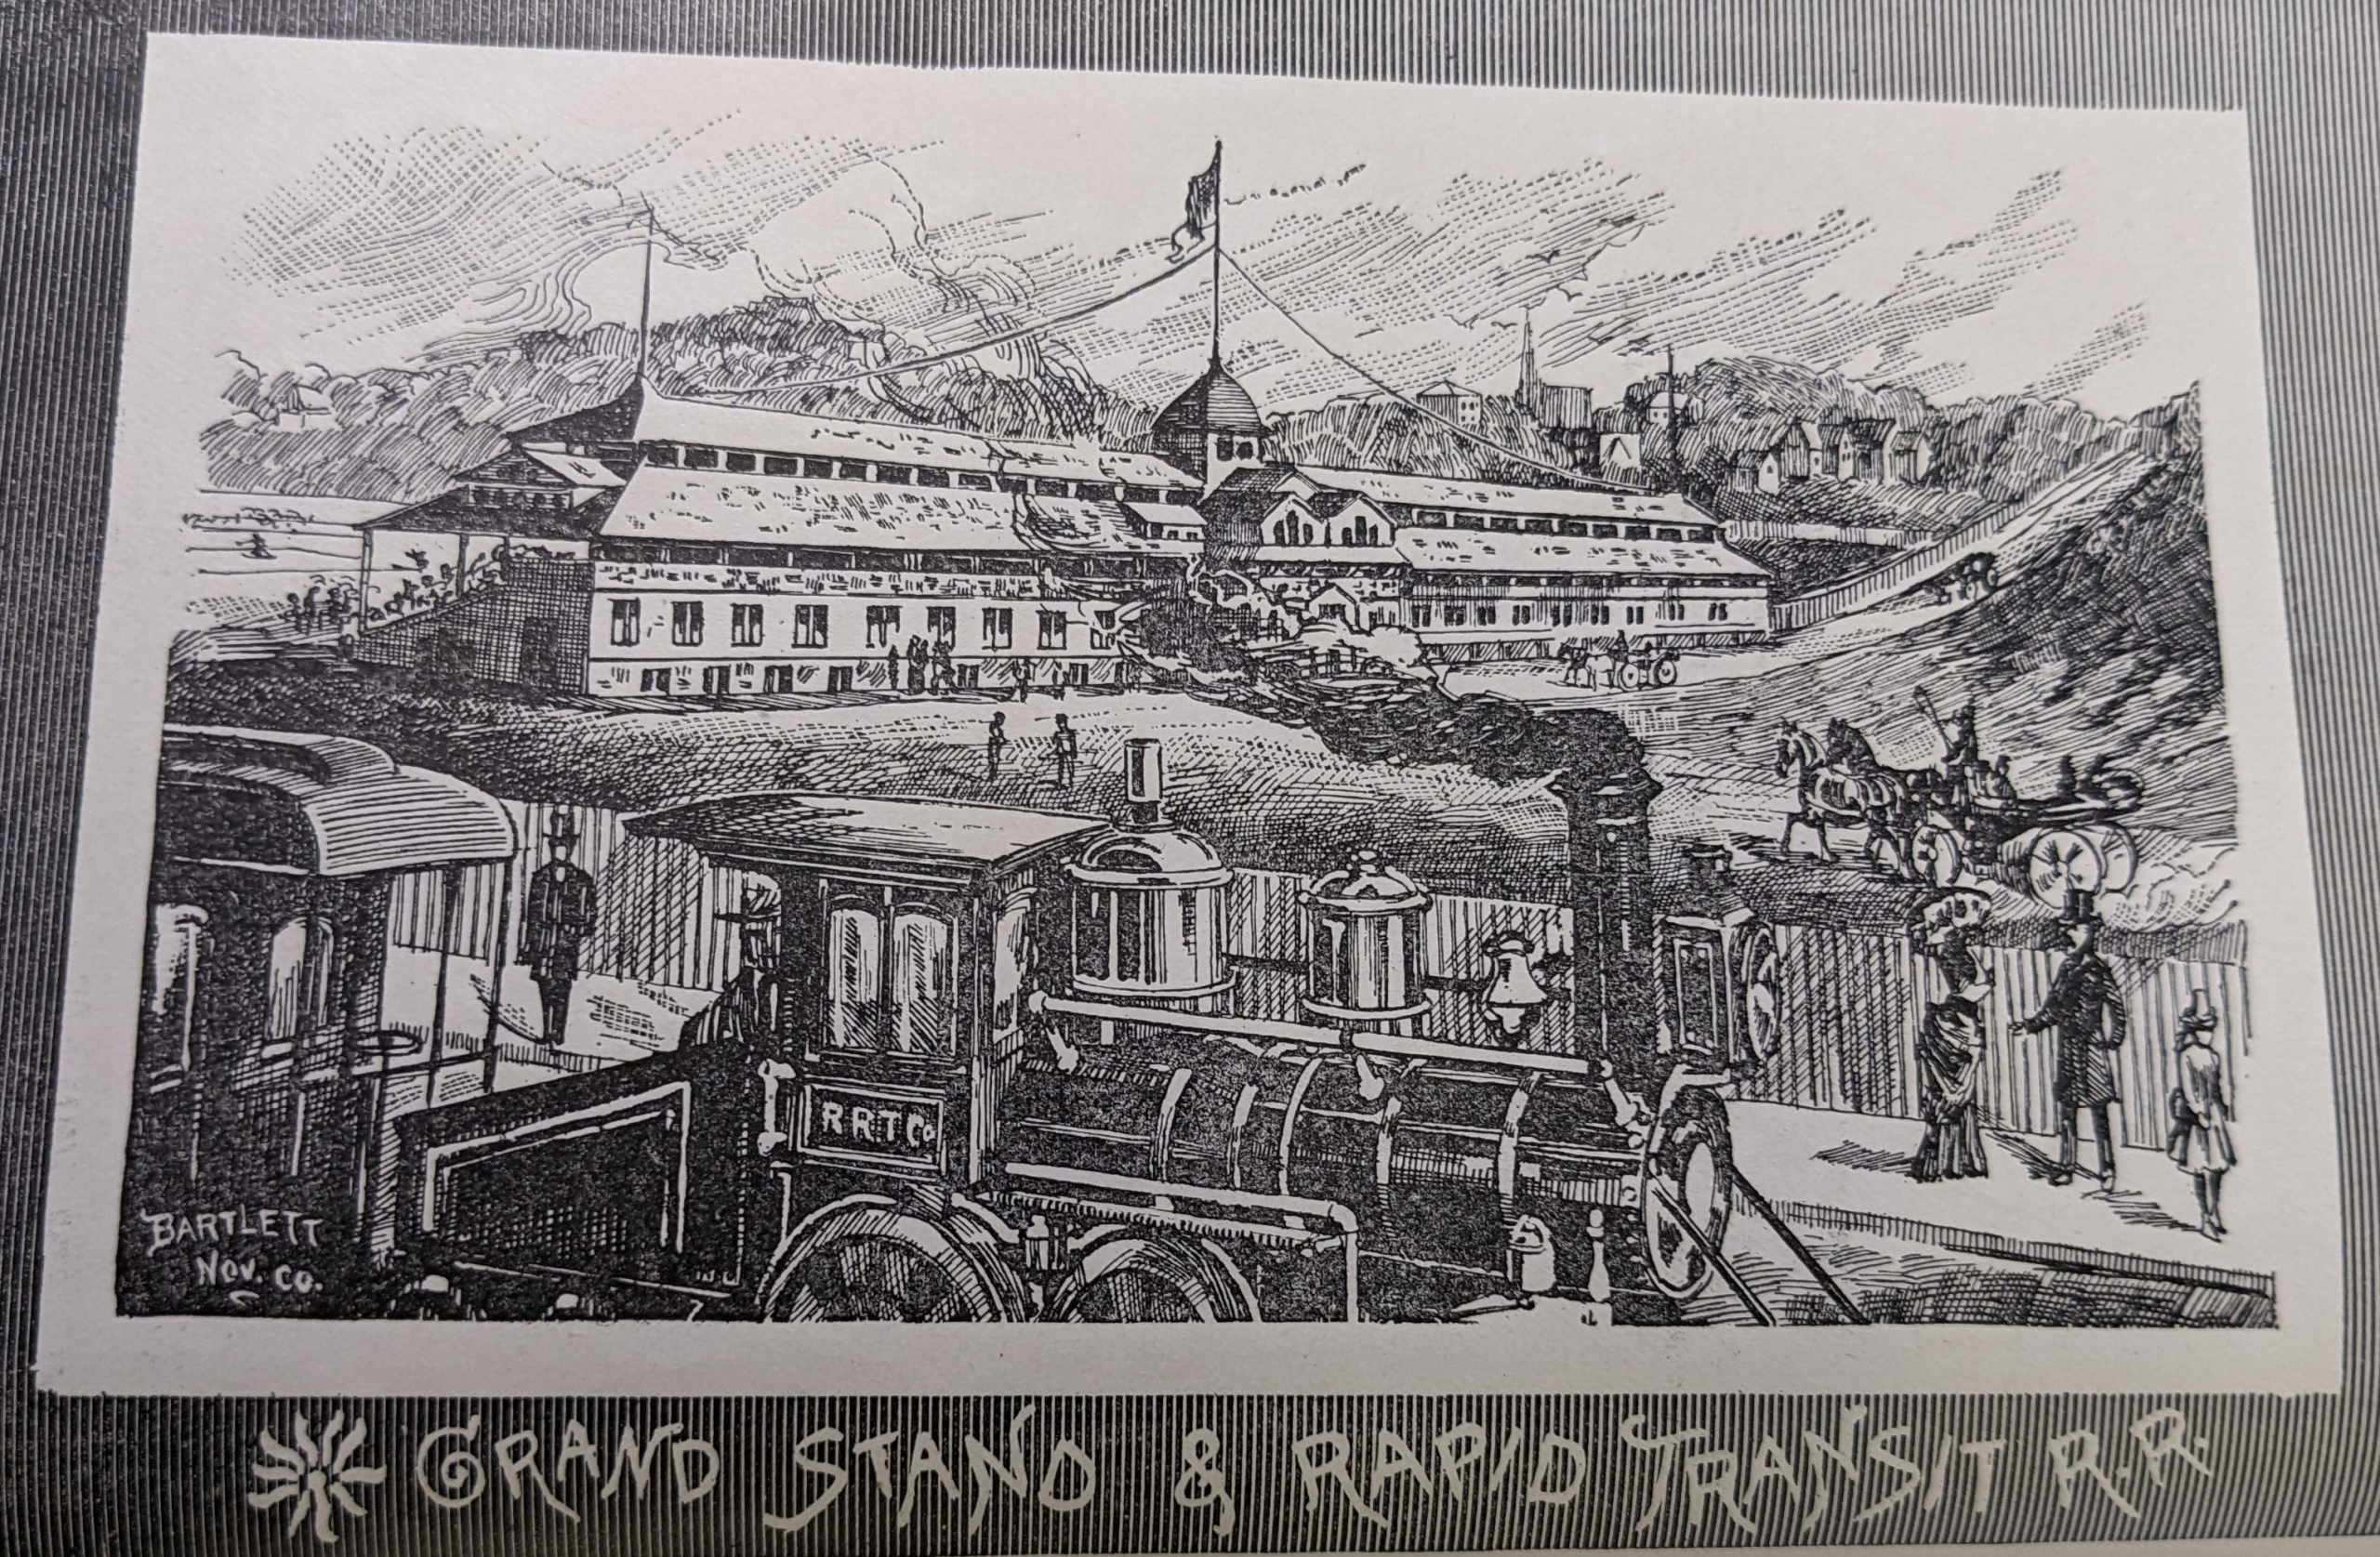 St. George Grounds grandstand, circa 1886 (Courtesy of Larry DeFillipo)